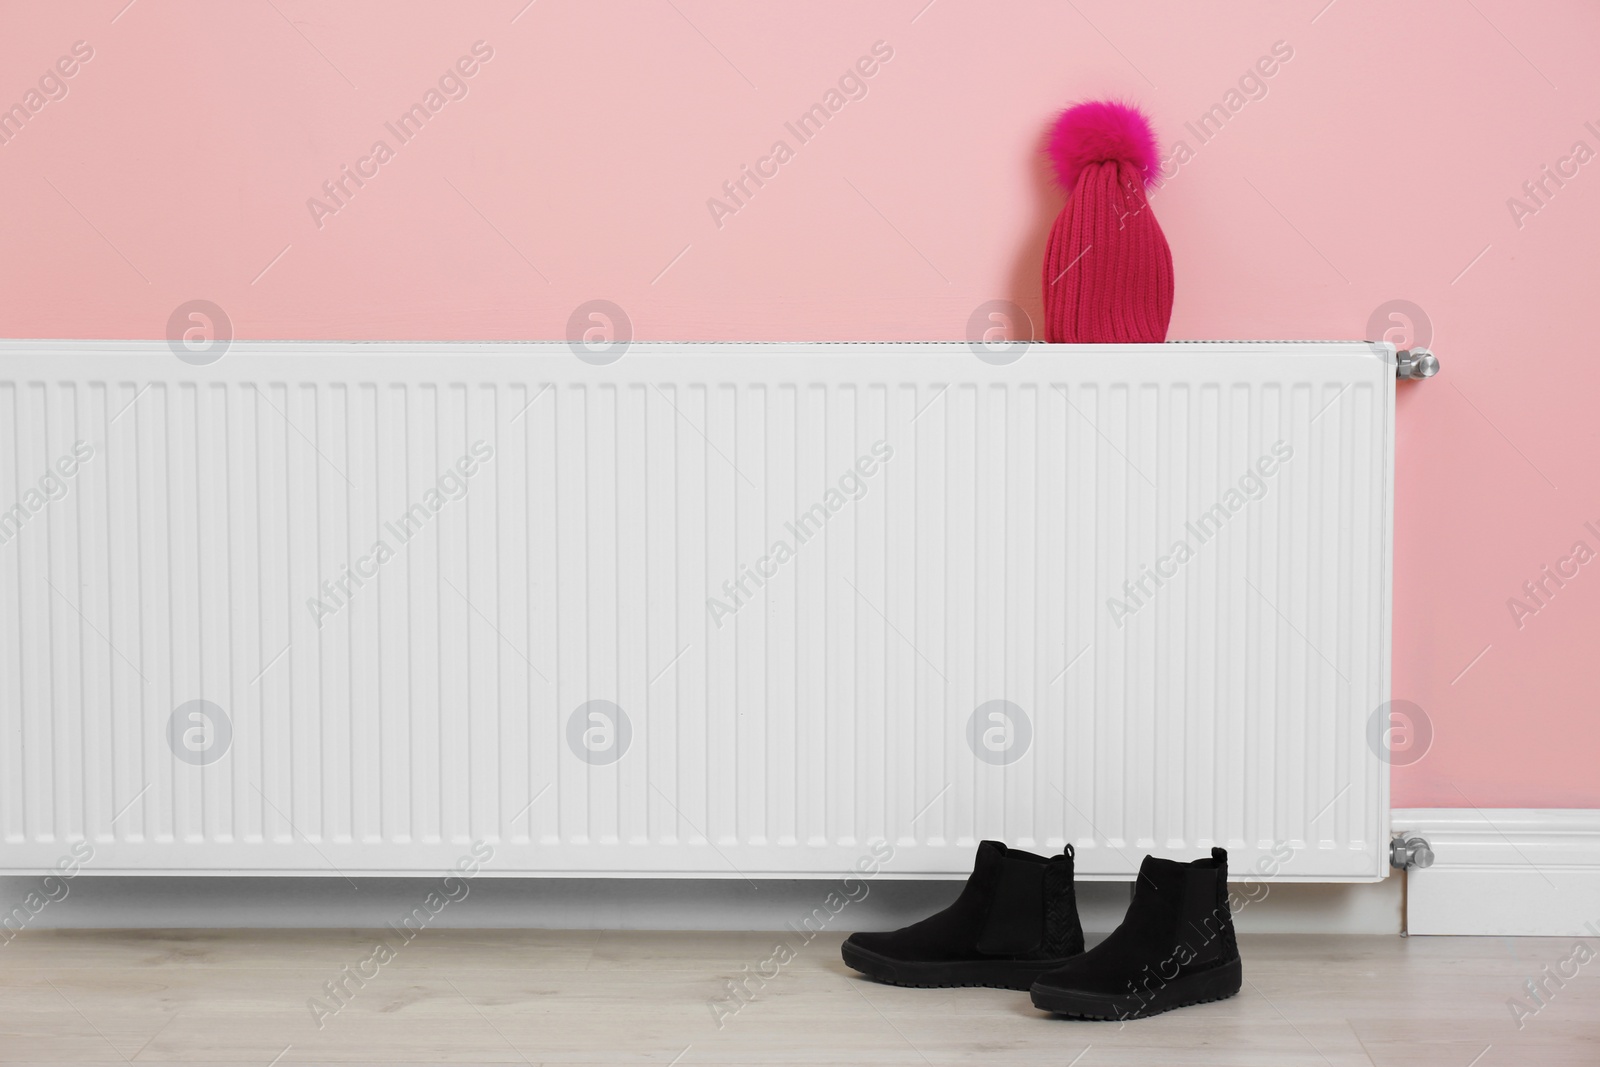 Photo of Heating radiator with knitted cap and shoes near color wall